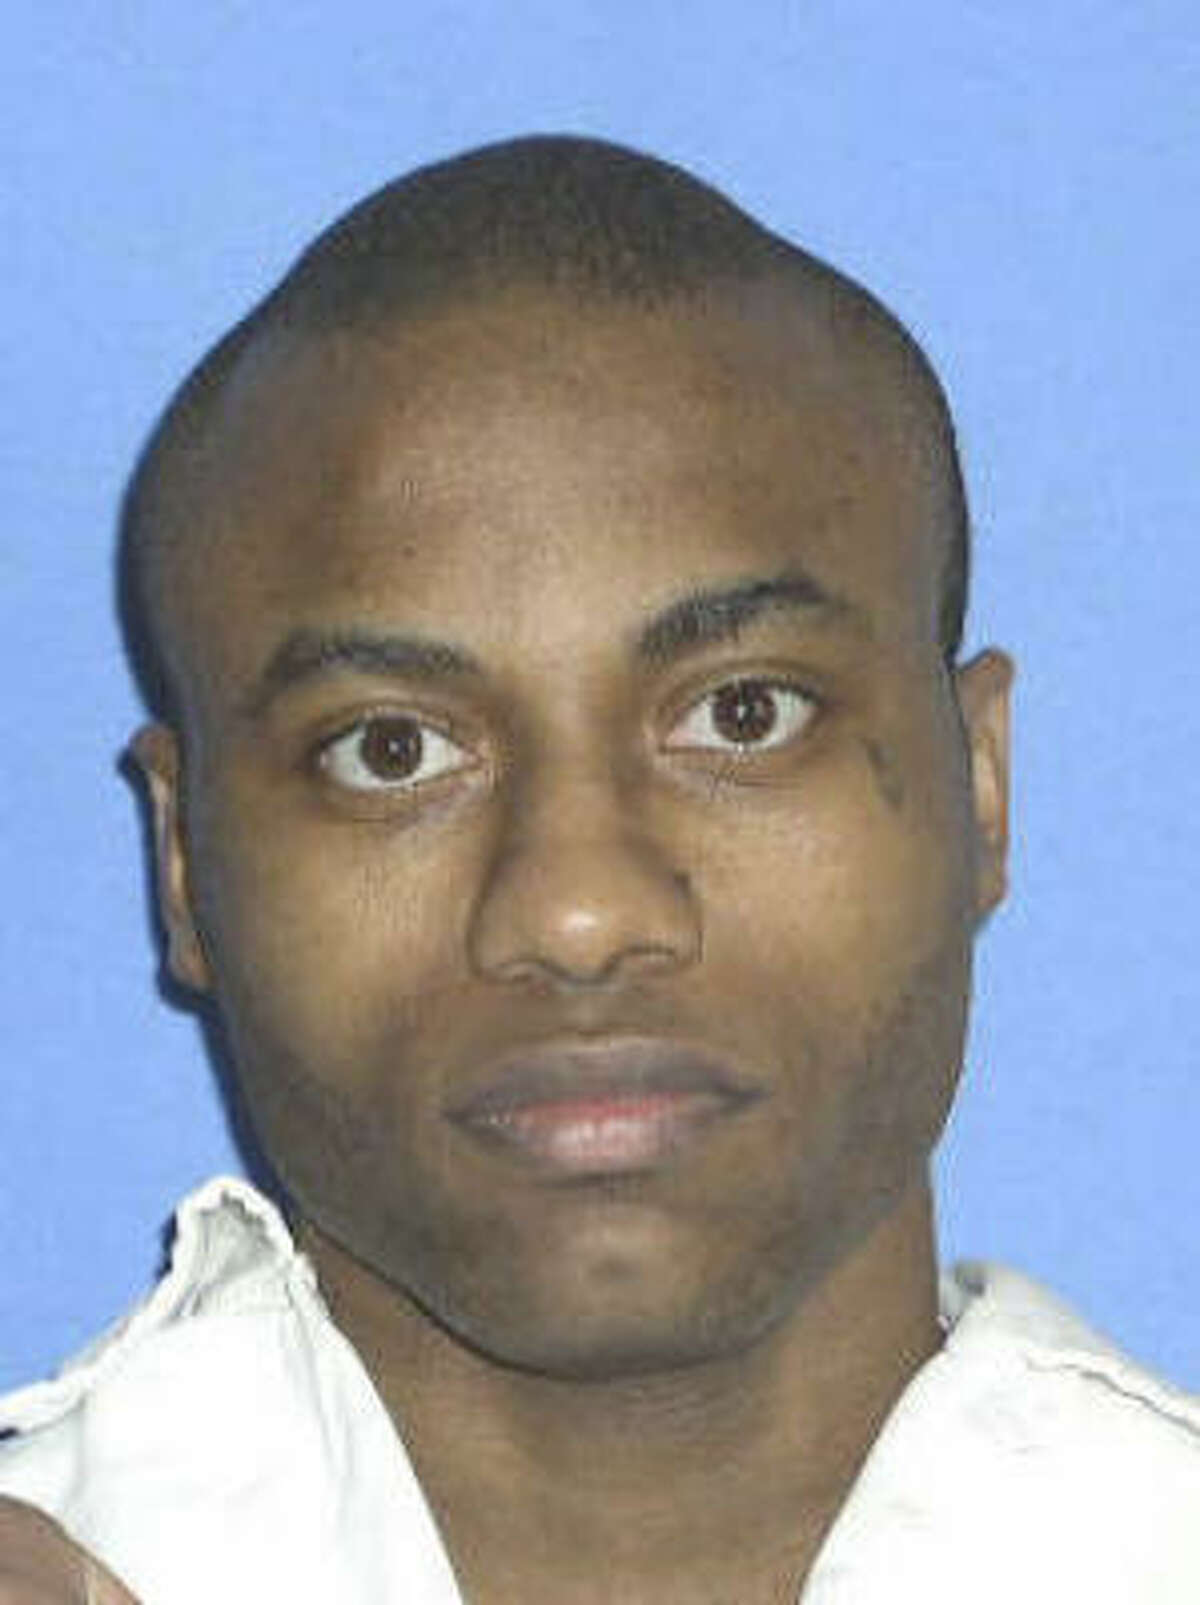 Johnny Ray Conner, 32, became the 400th inmate Texas has put to death since resuming executions in 1982. He was convicted of murder in a 1998 Houston convenience store robbery.